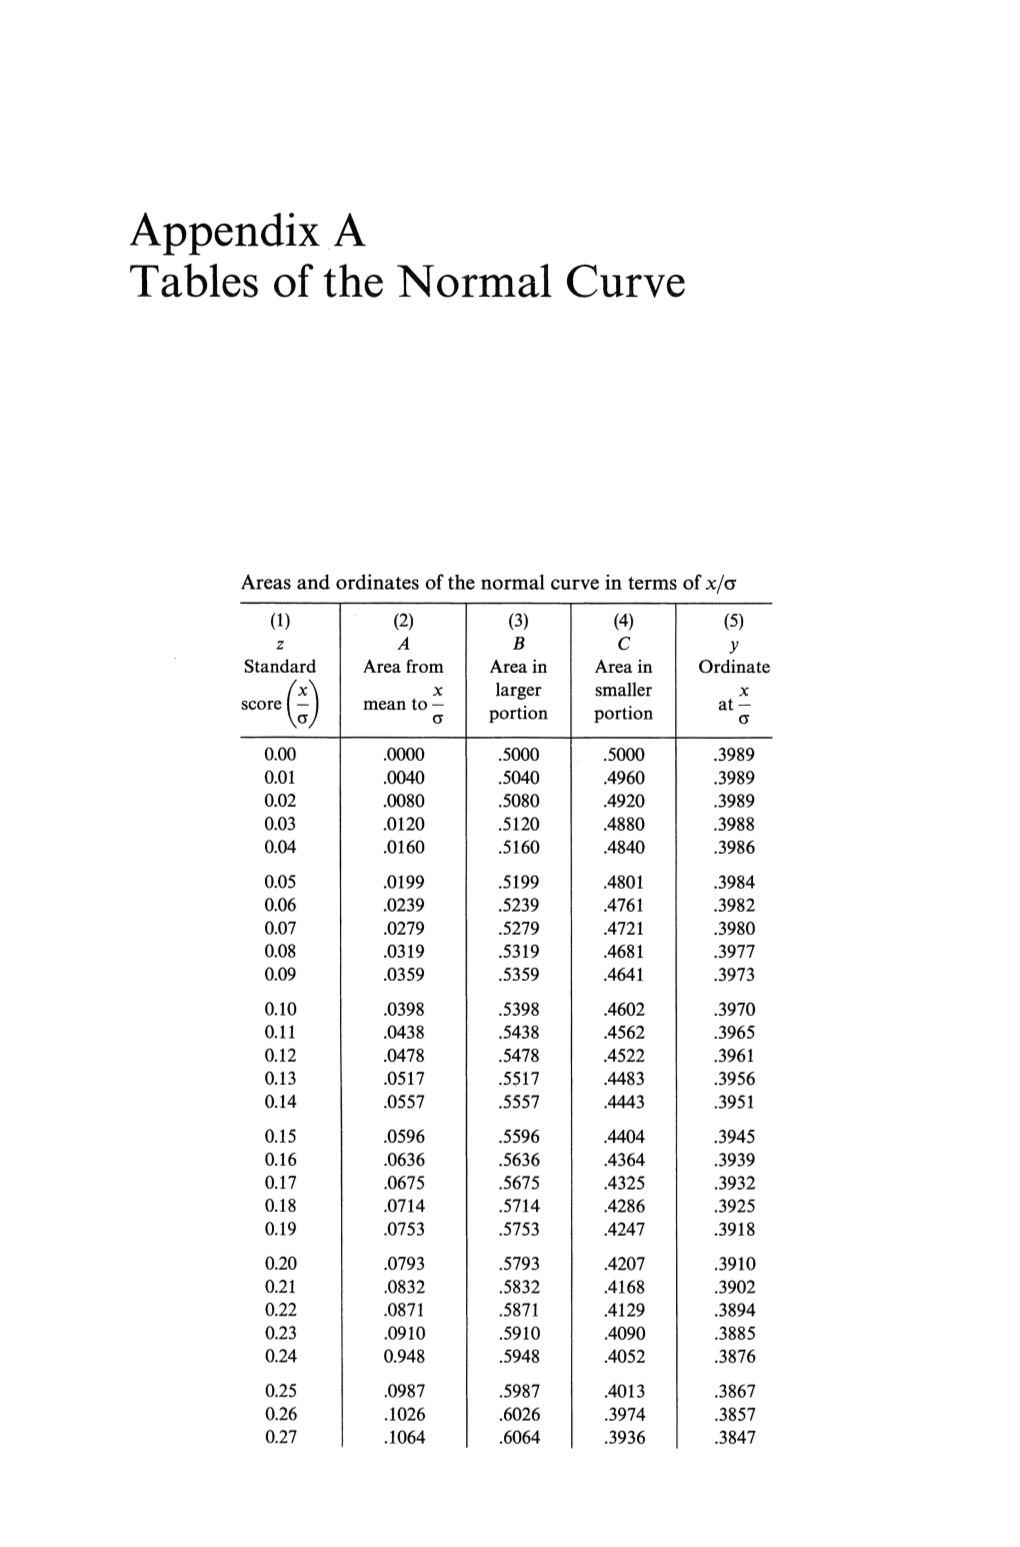 Tables of the Normal Curve